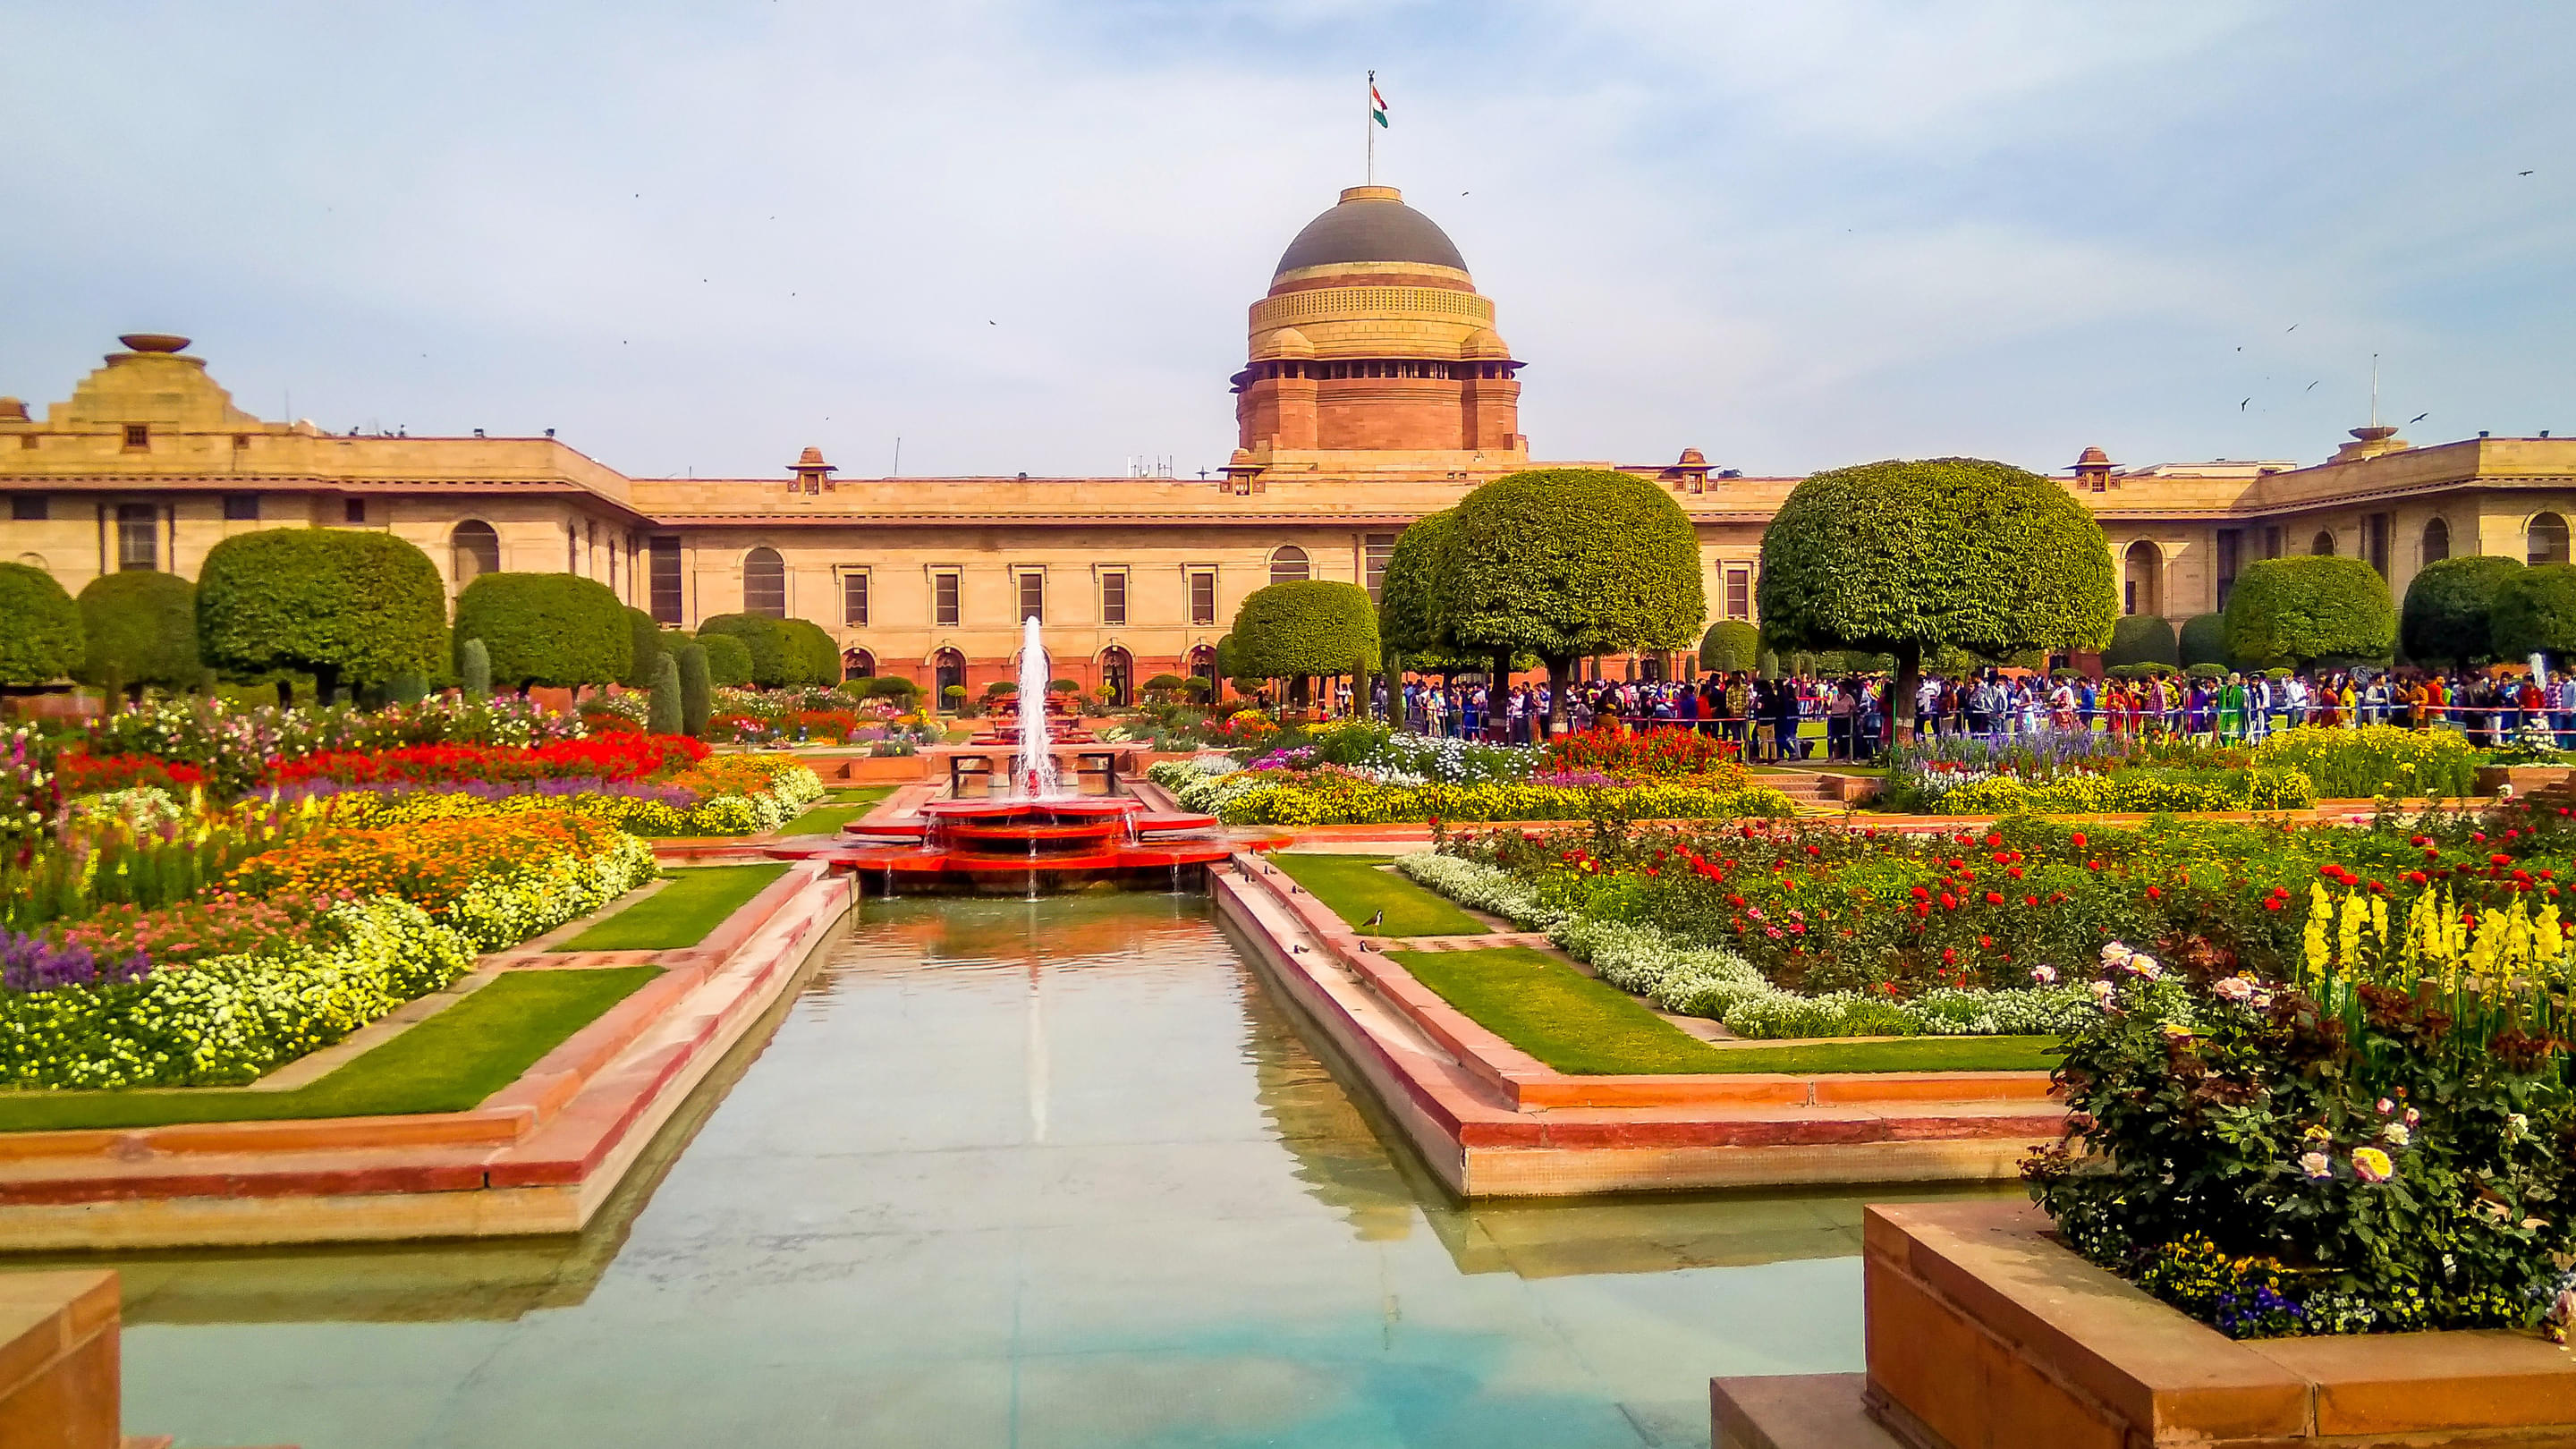 Mughal Gardens Overview